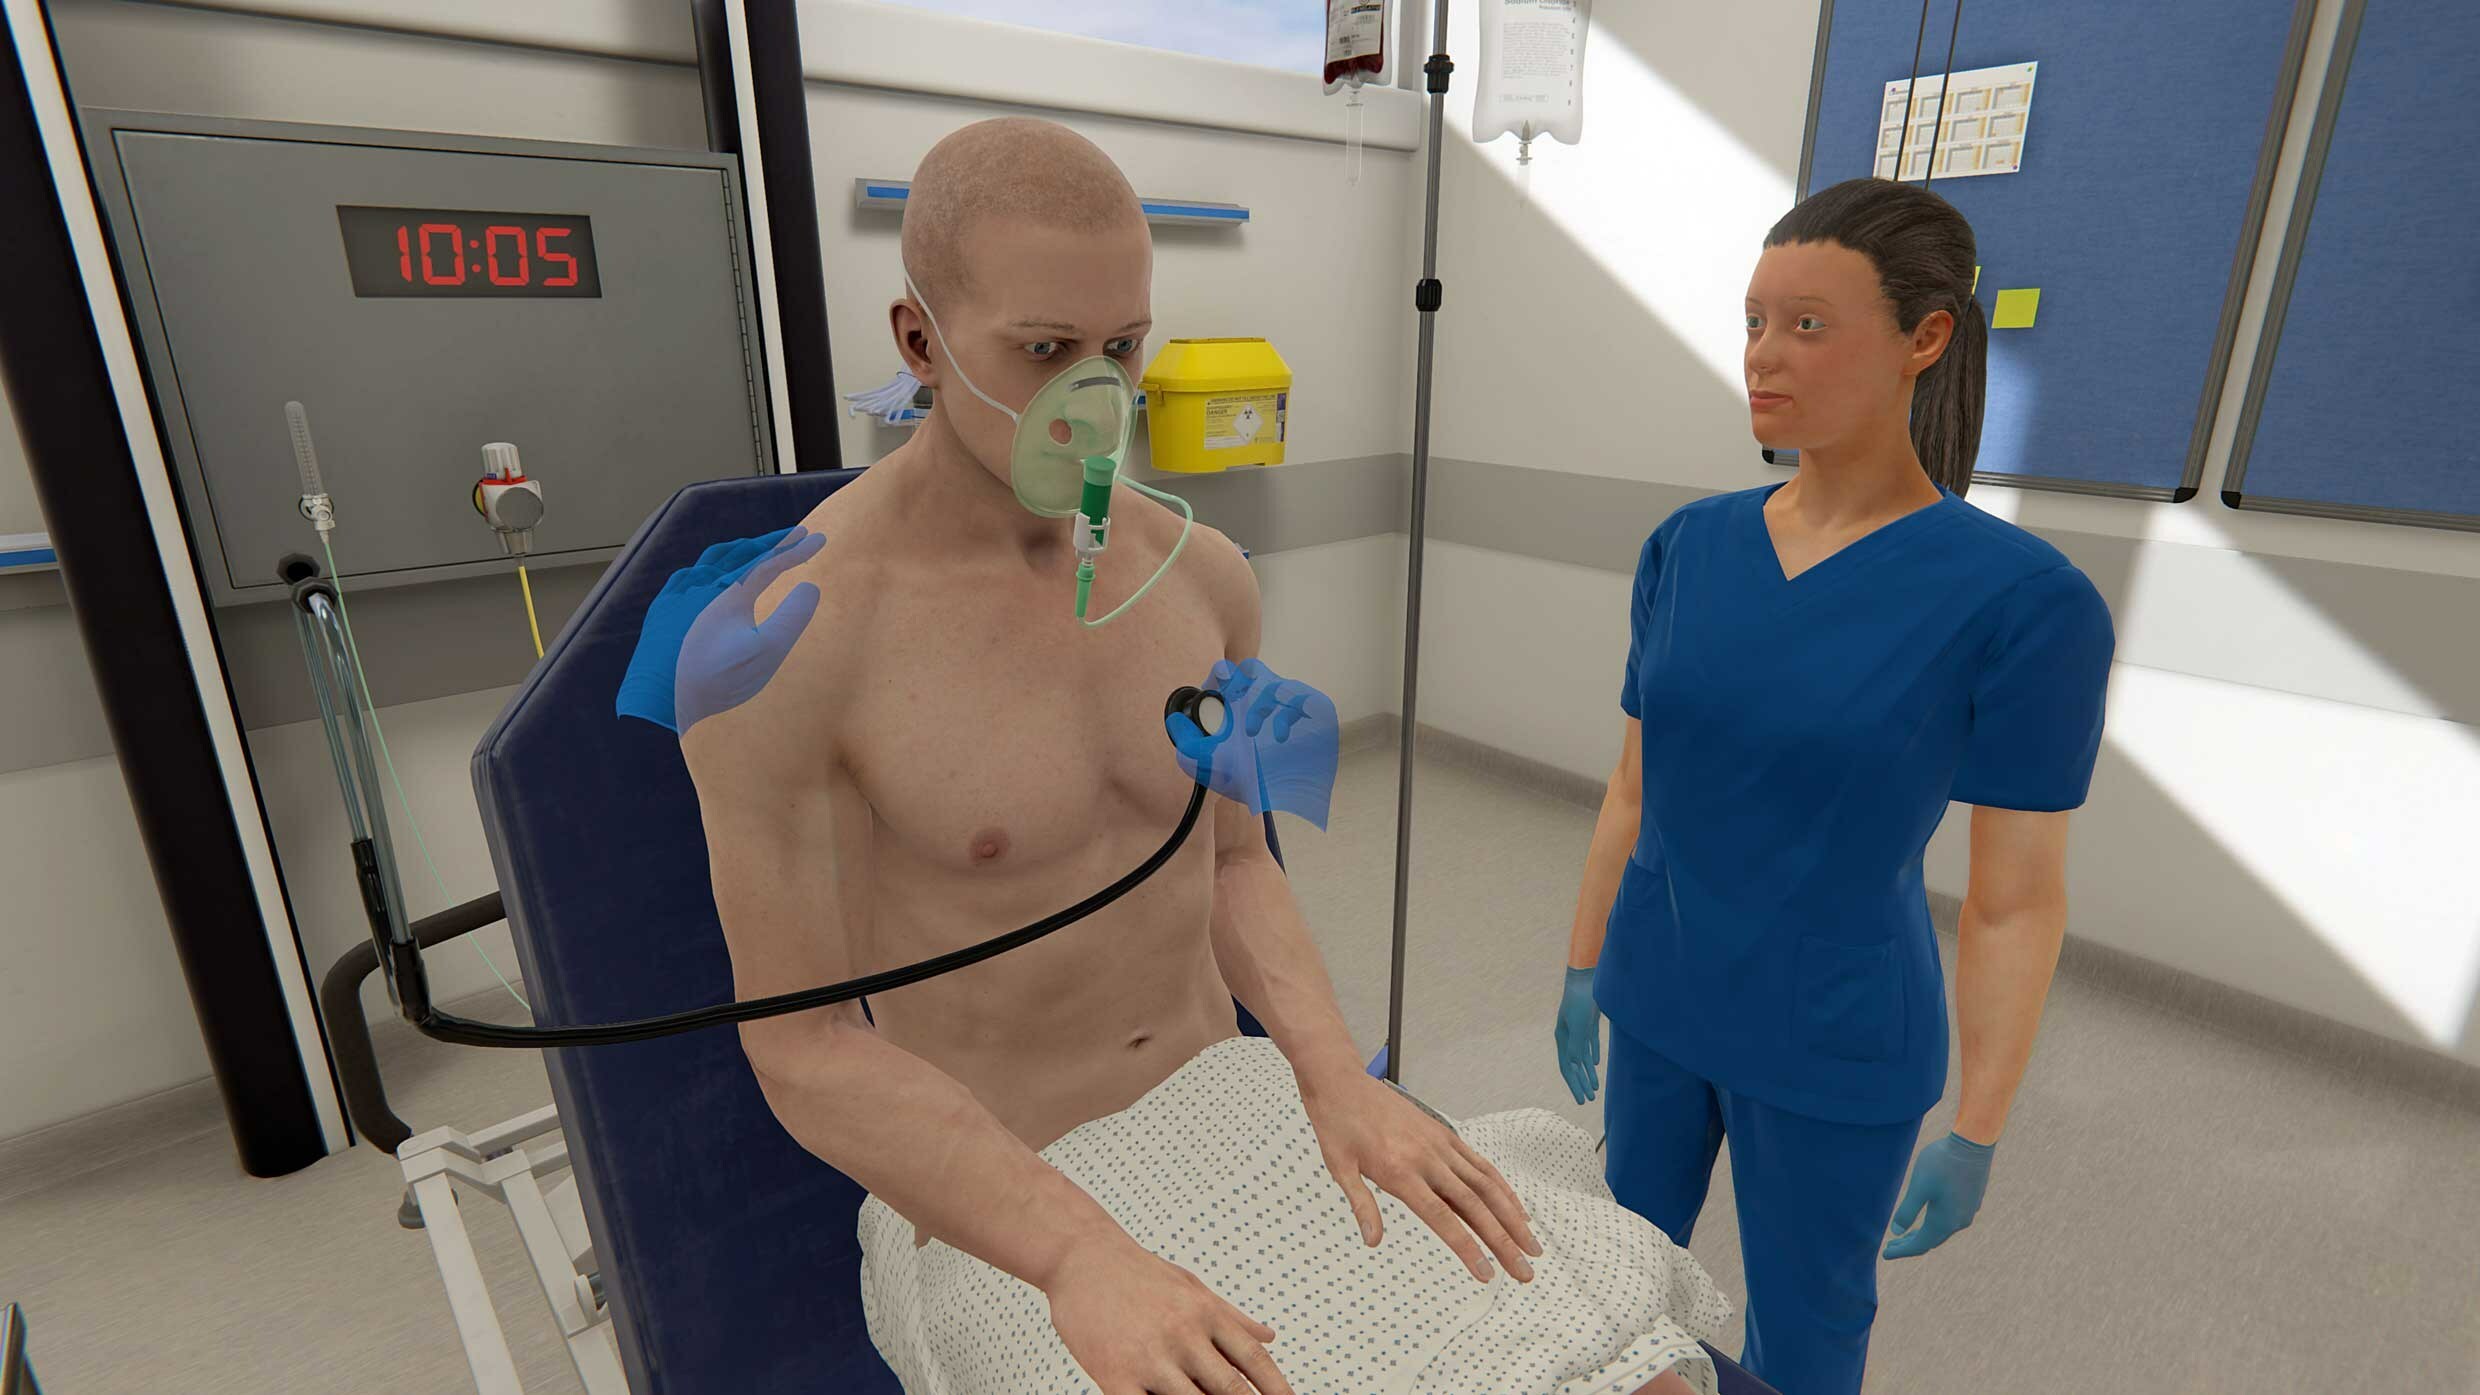 A screenshot of a virtual patient checkup is shown.